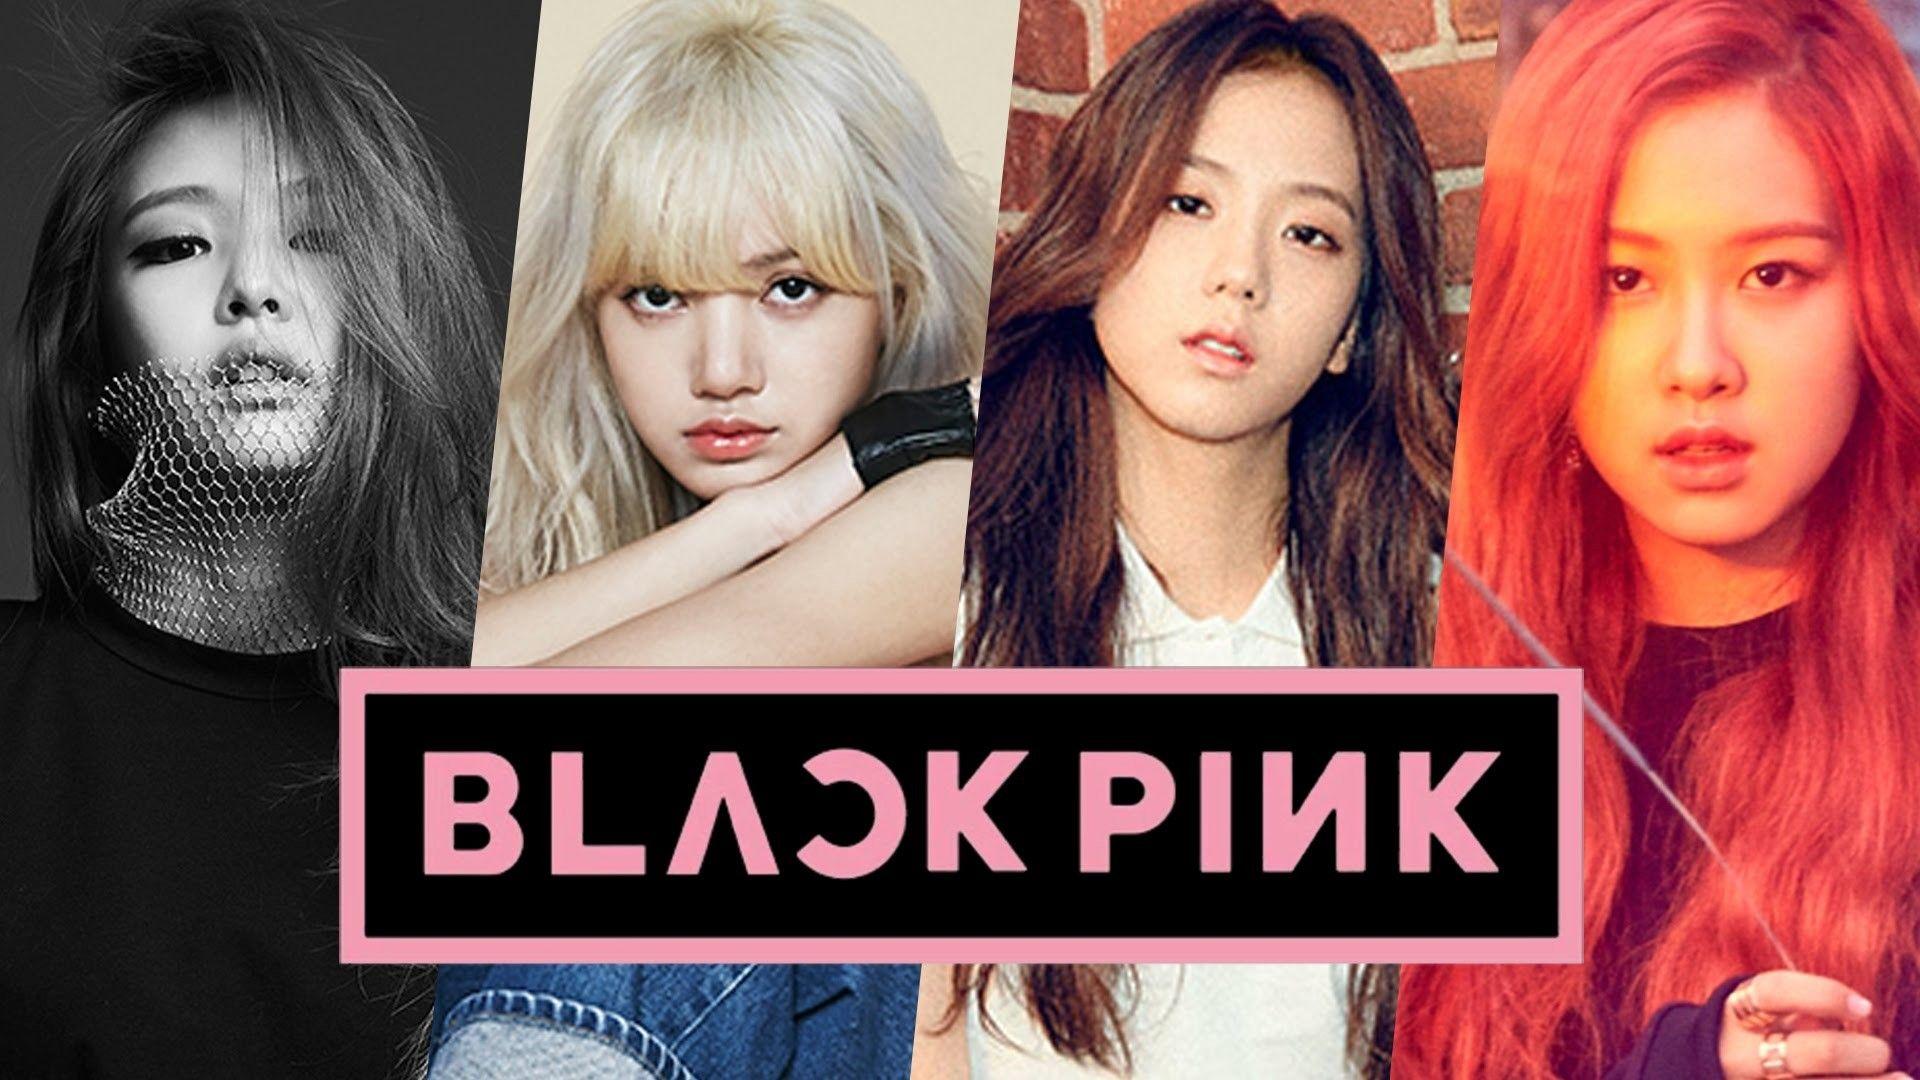 Colouring Your Phone and Desktop With Blackpink's Logo